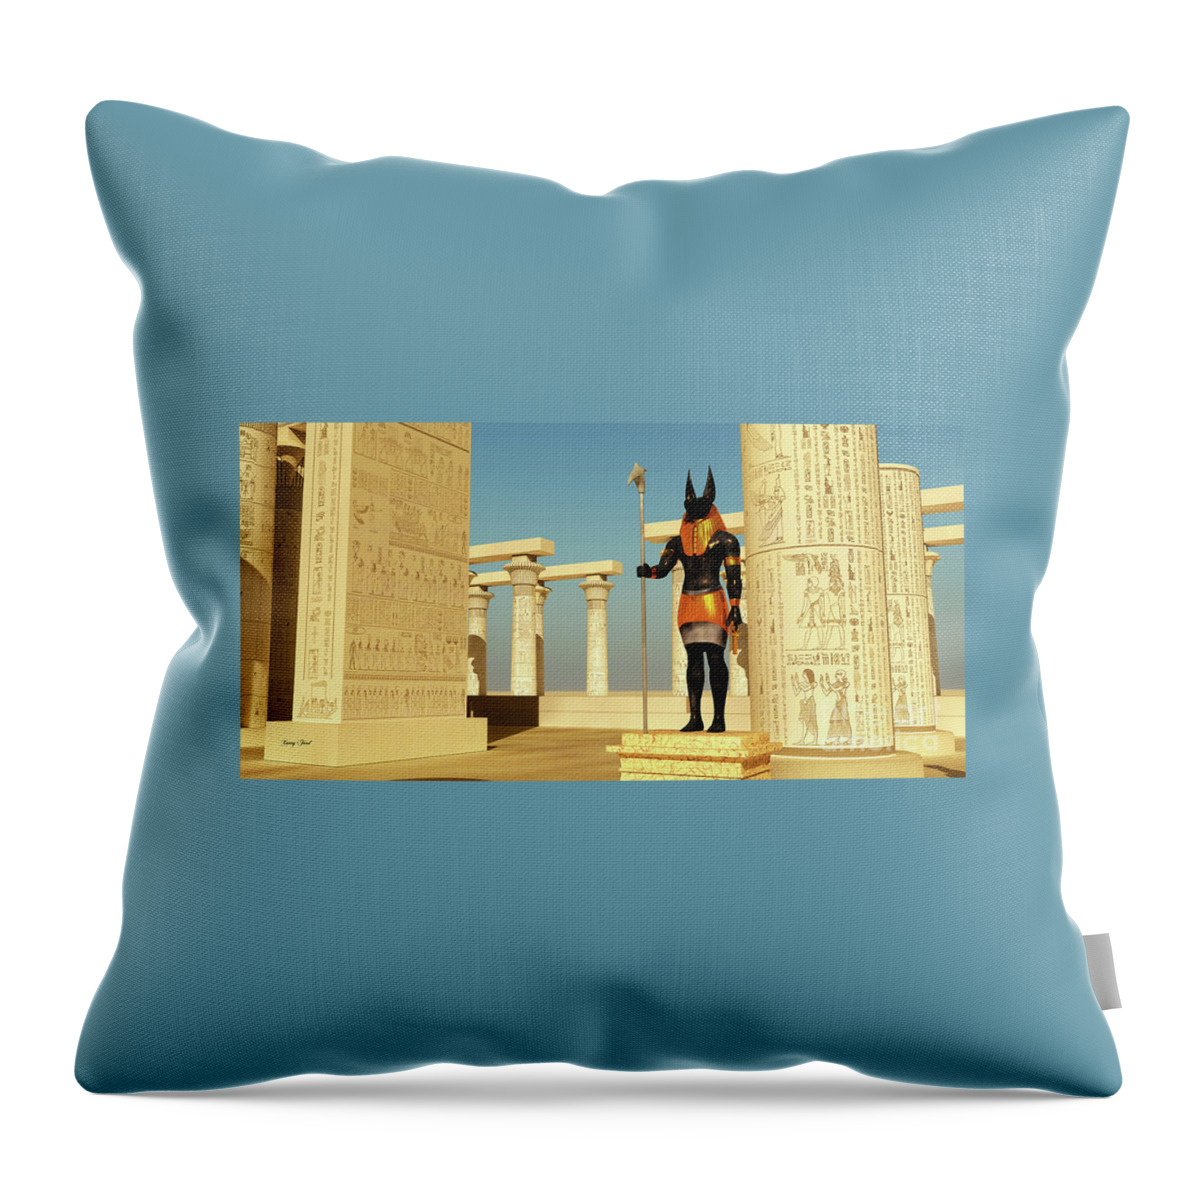 Anubis Throw Pillow featuring the digital art Anubis Statue in Temple by Corey Ford